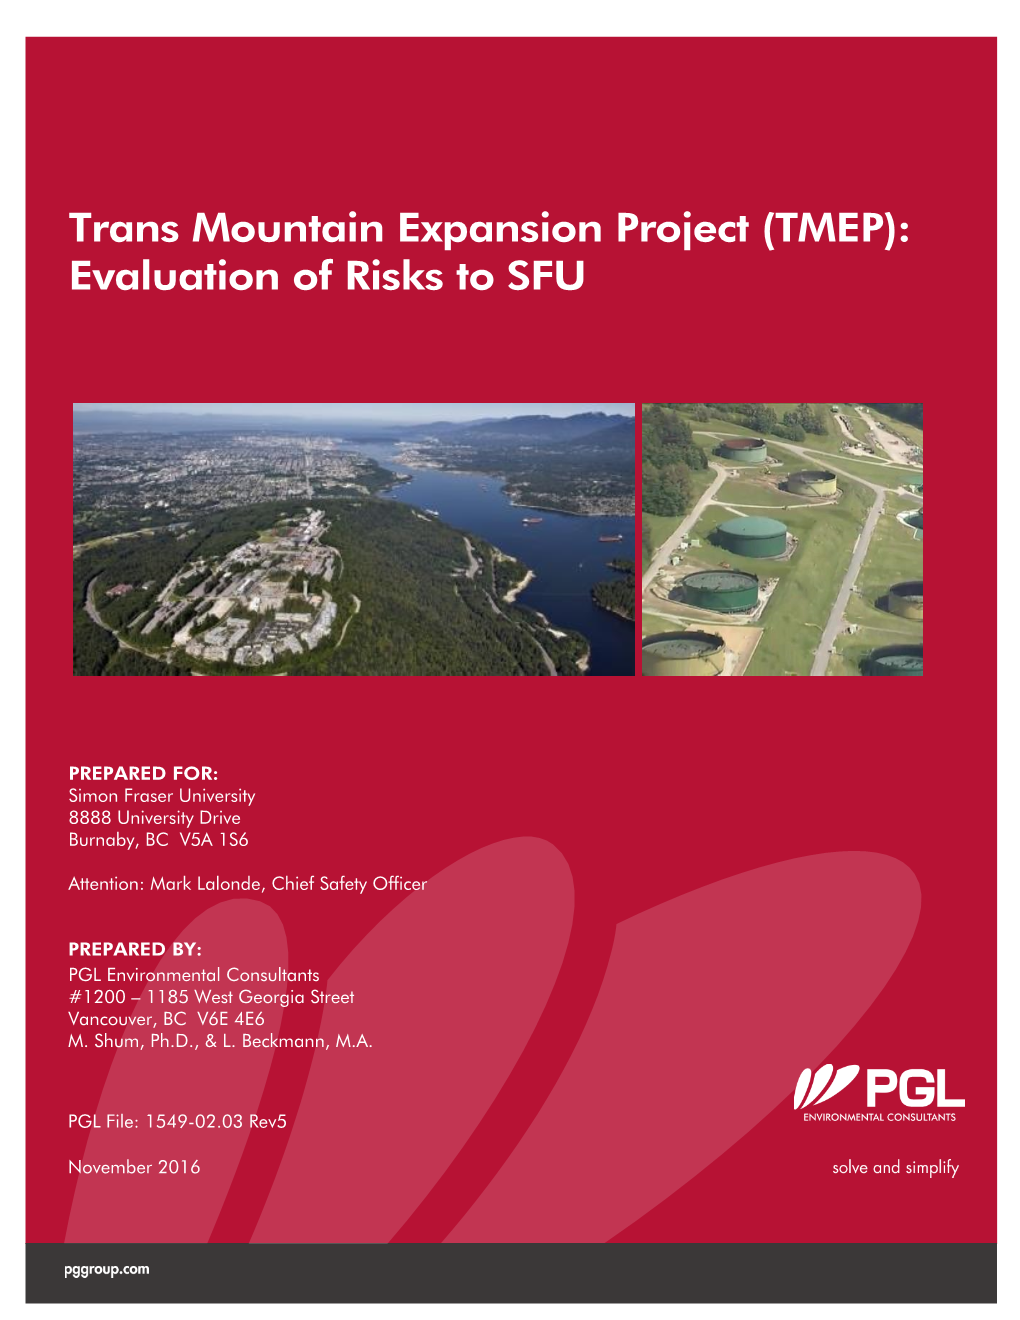 Trans Mountain Expansion Project (TMEP): Evaluation of Risks to SFU